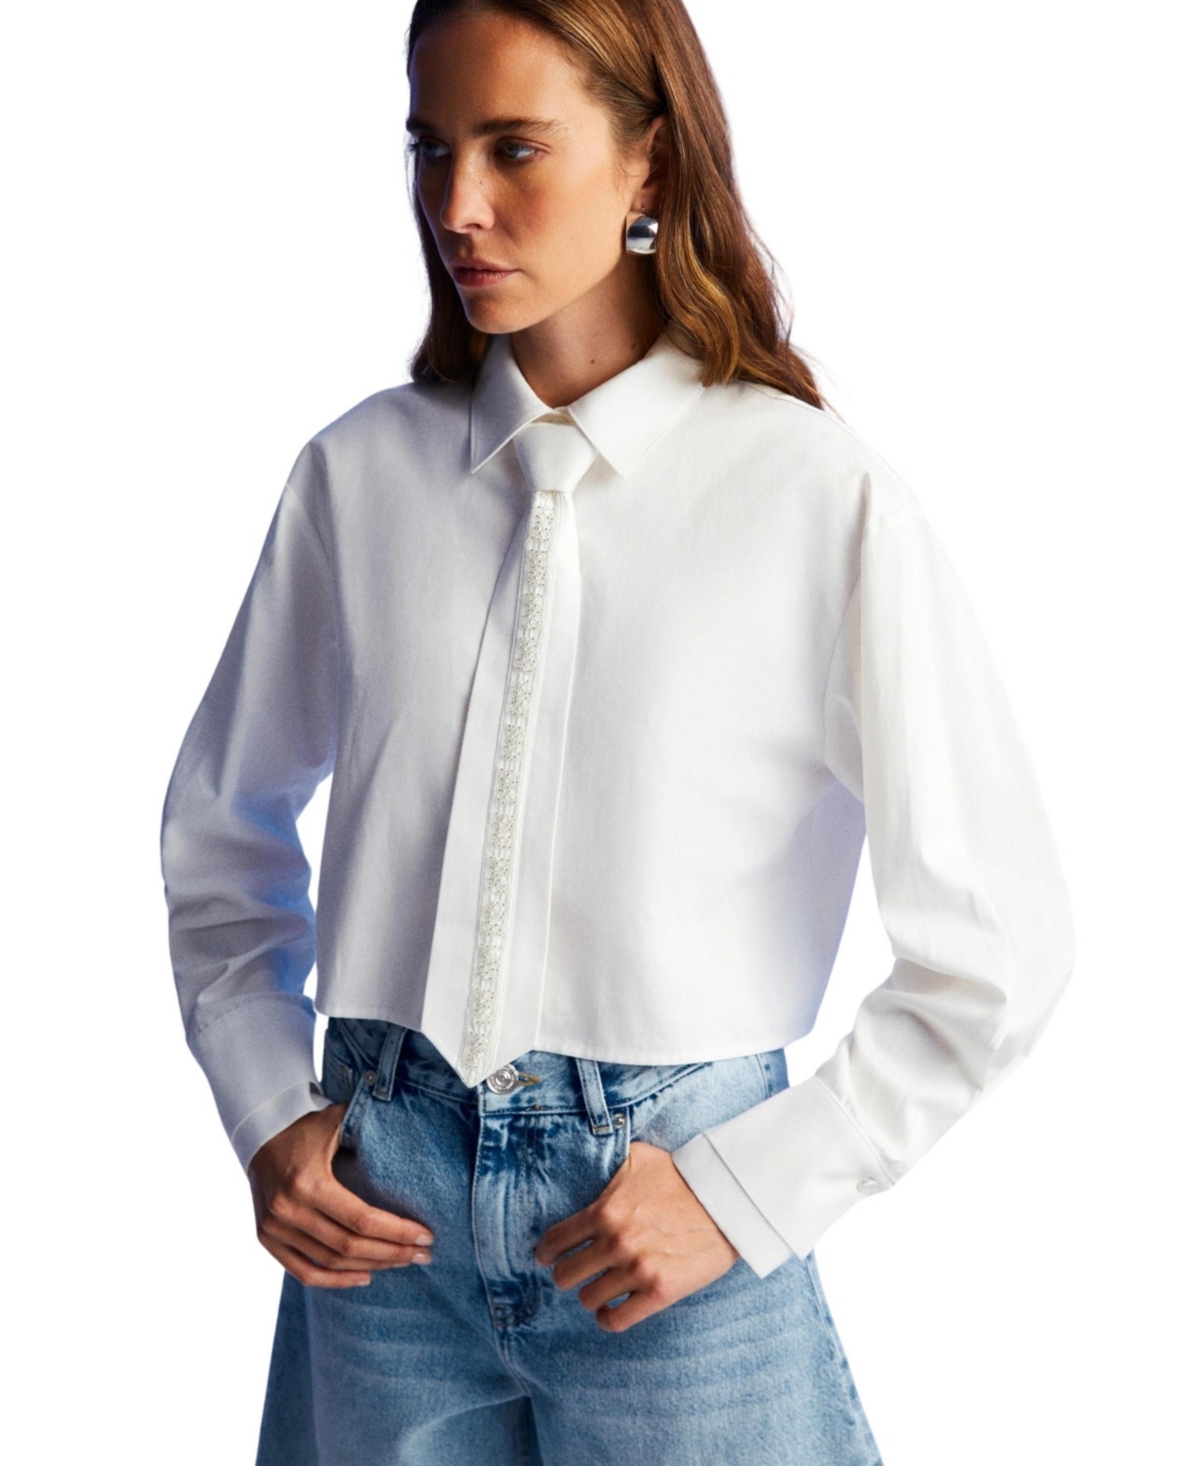 Women's Shirt with Tie Detail - White